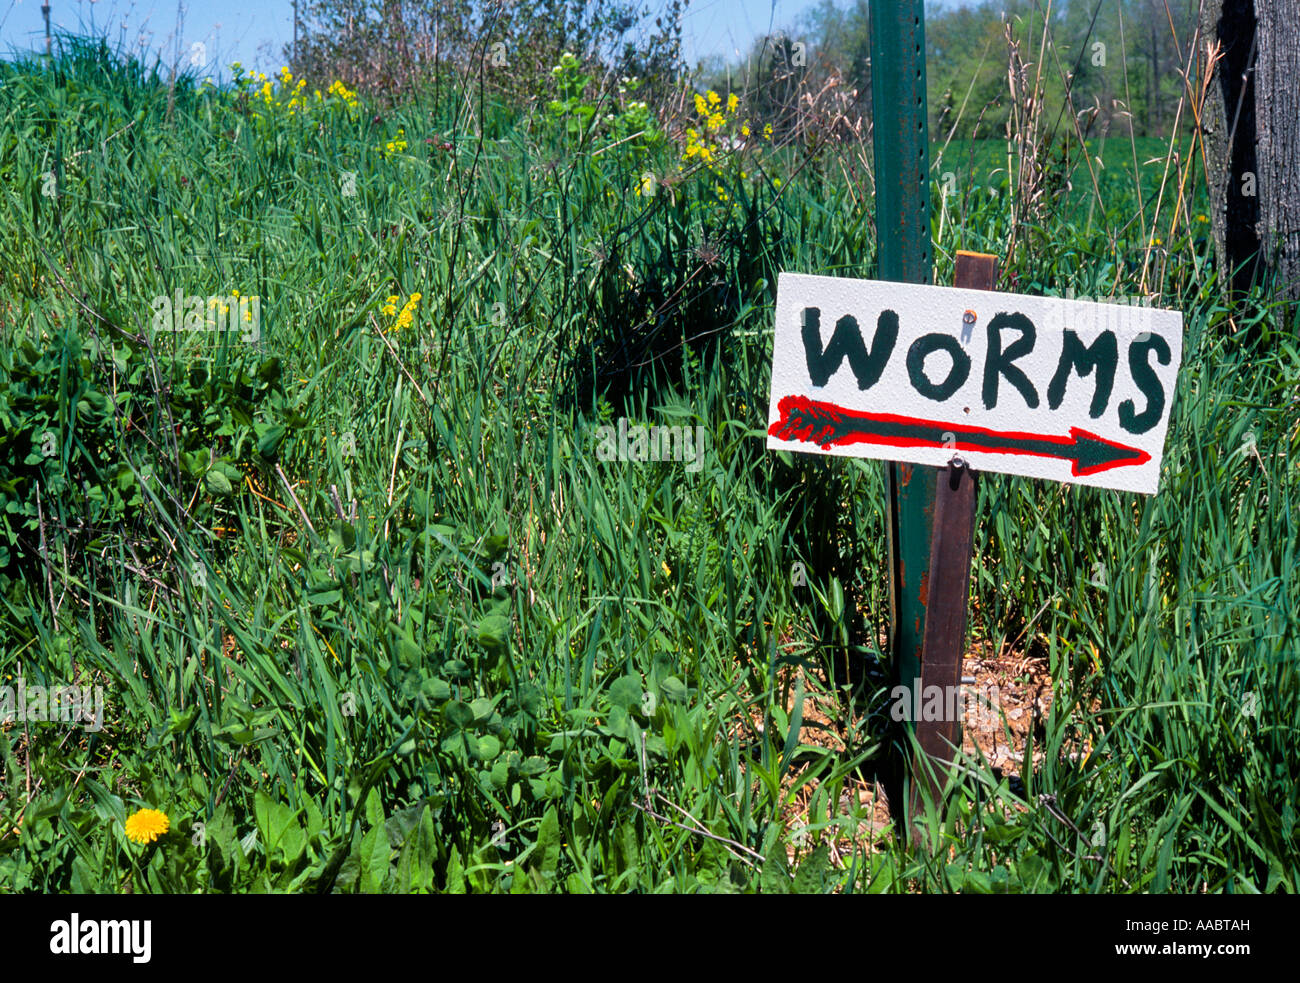 Fishing bait. Worms for sale sign. Hand painted sign for fishing tackle  worms. Deserted country road Stock Photo - Alamy